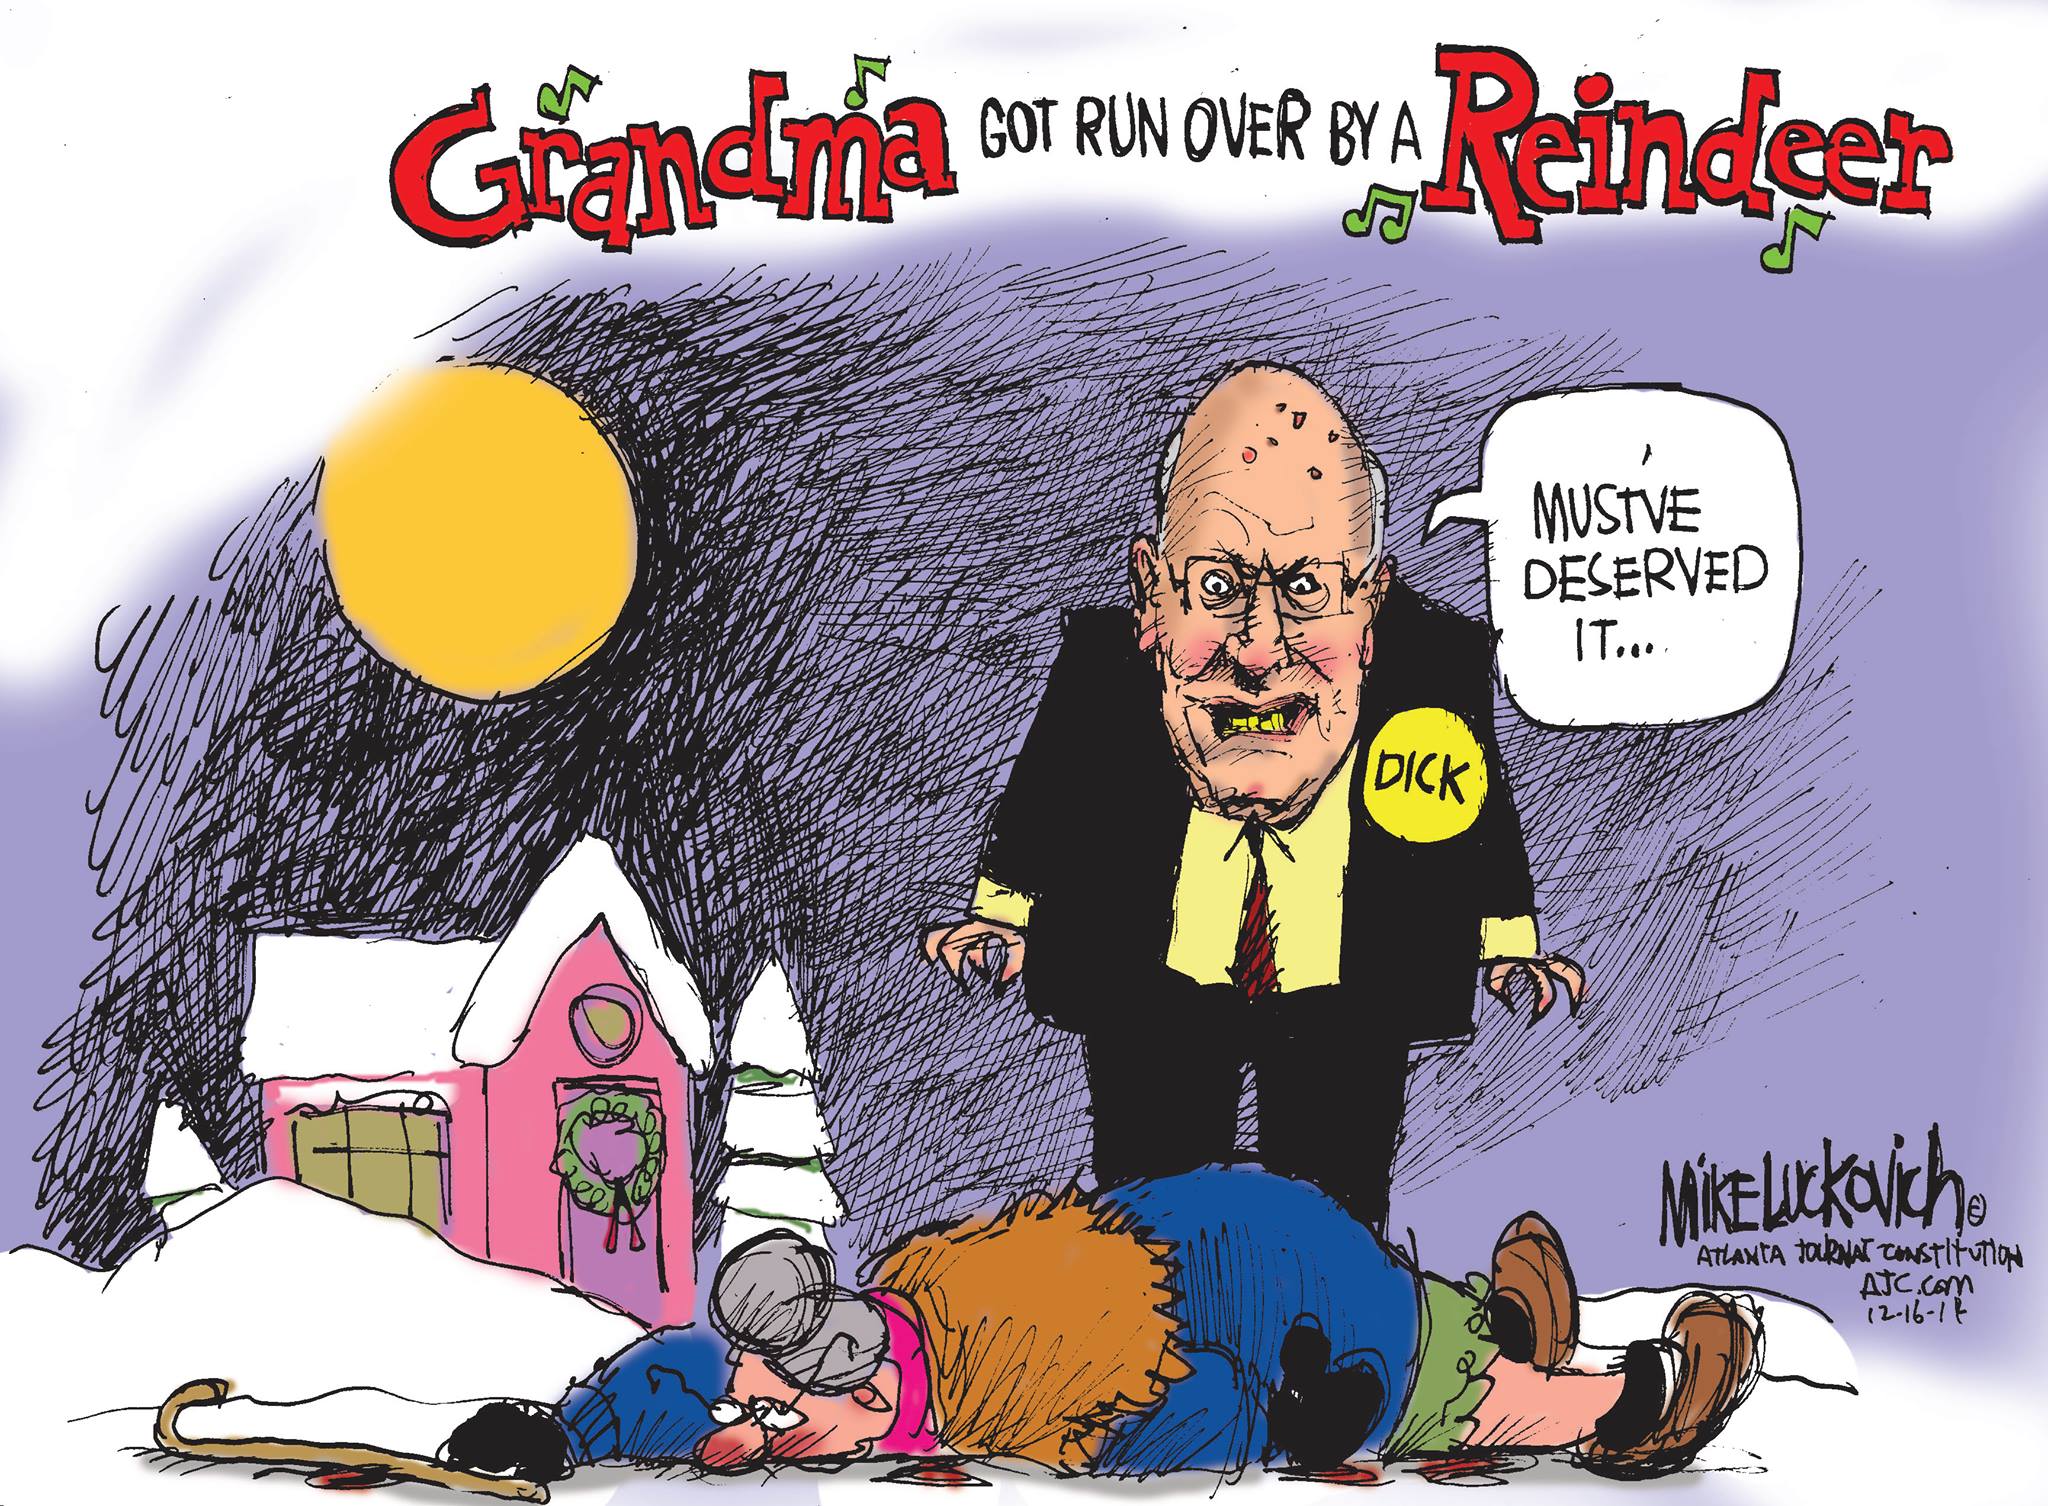 best of Heart Dick cartoons cheney attack